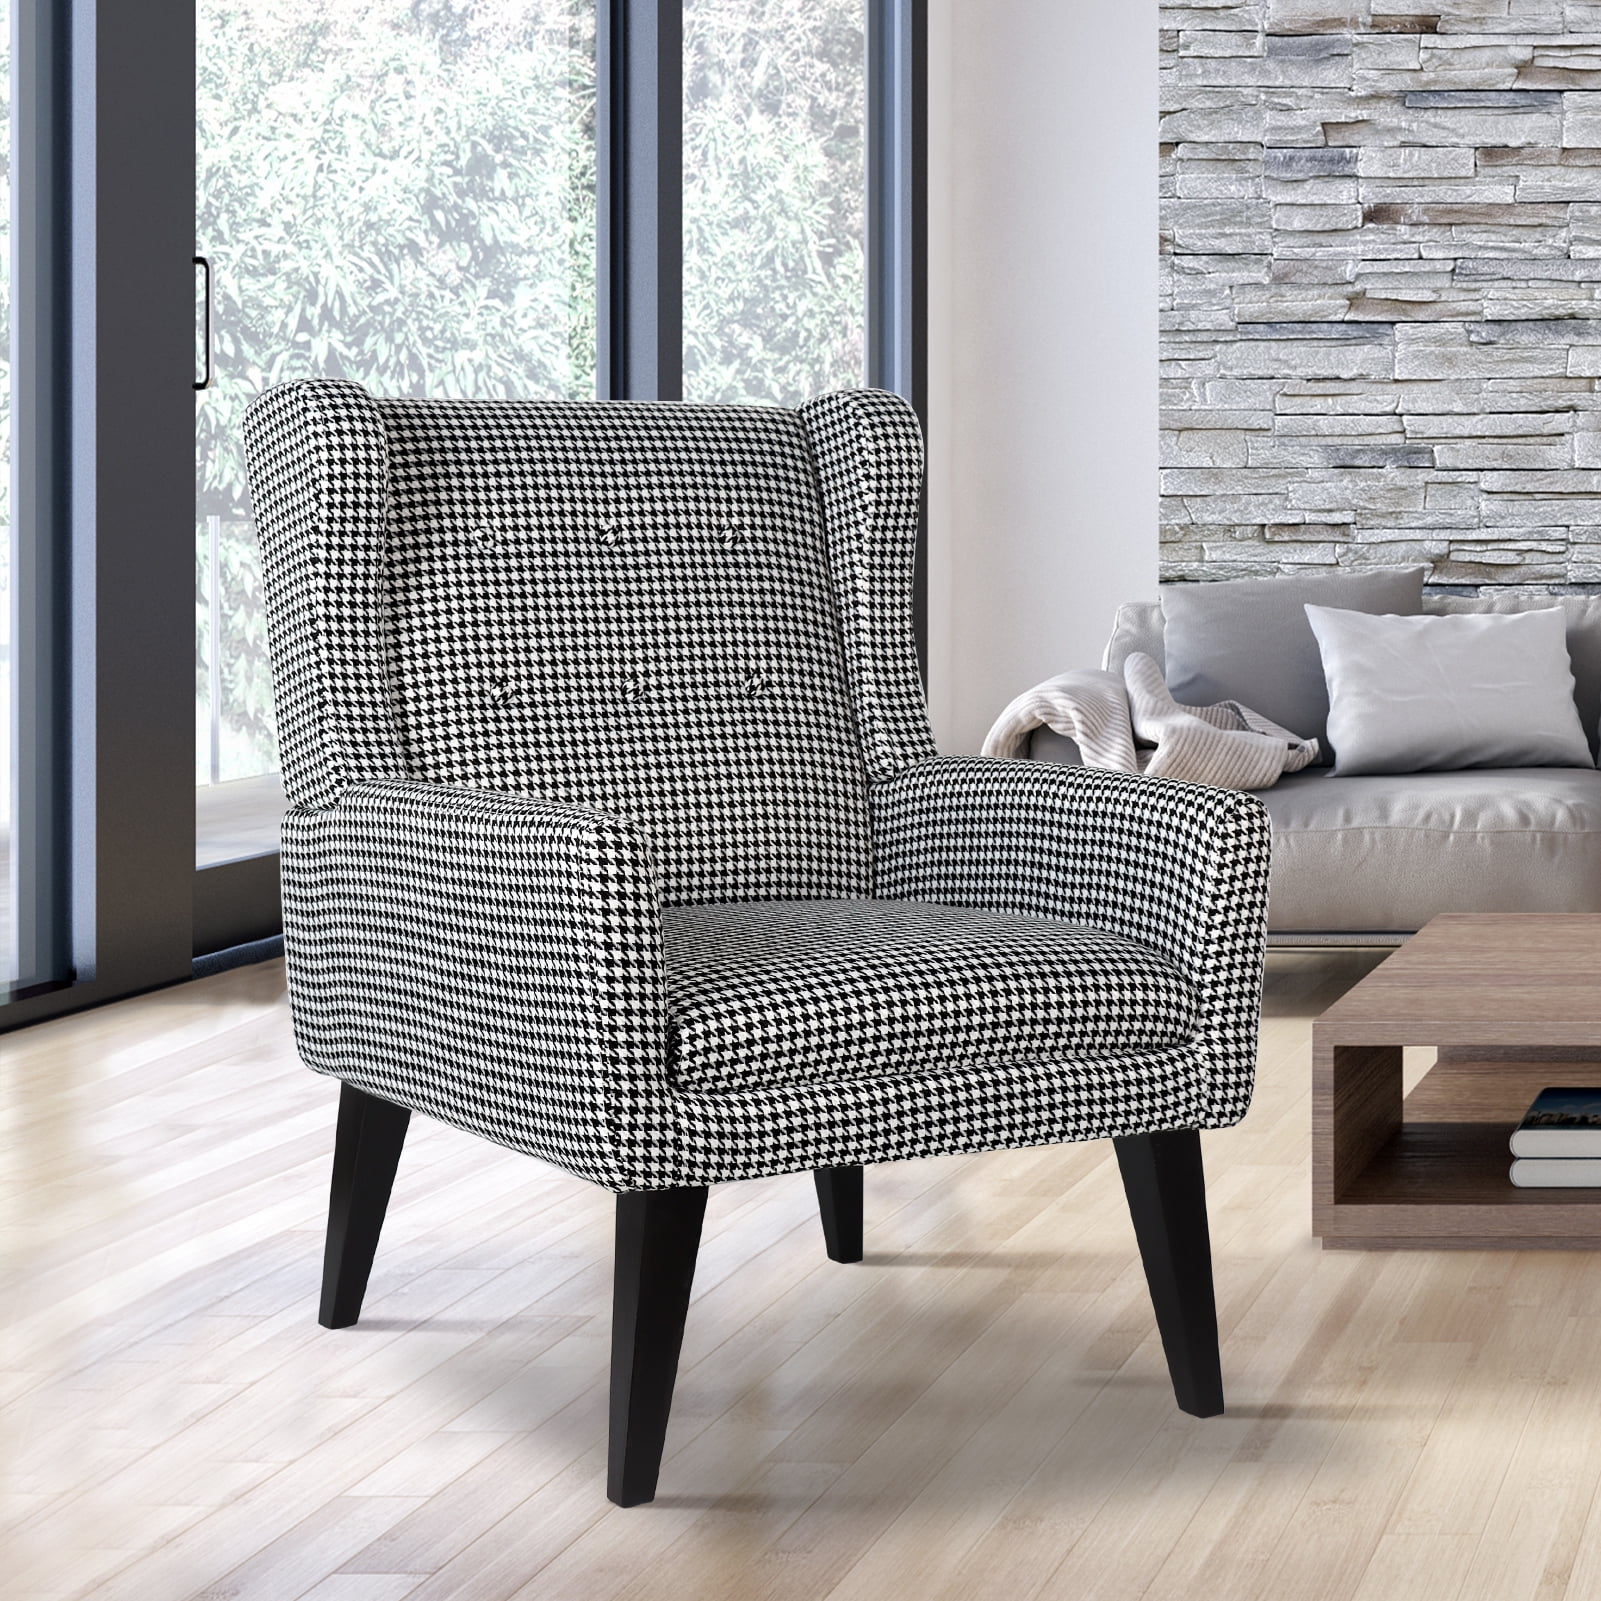 July's Song Accent Chair,Mid Century Modern Wingback Chair,Tufted Fabric  Comfy Living Room Chair,Houndstooth 